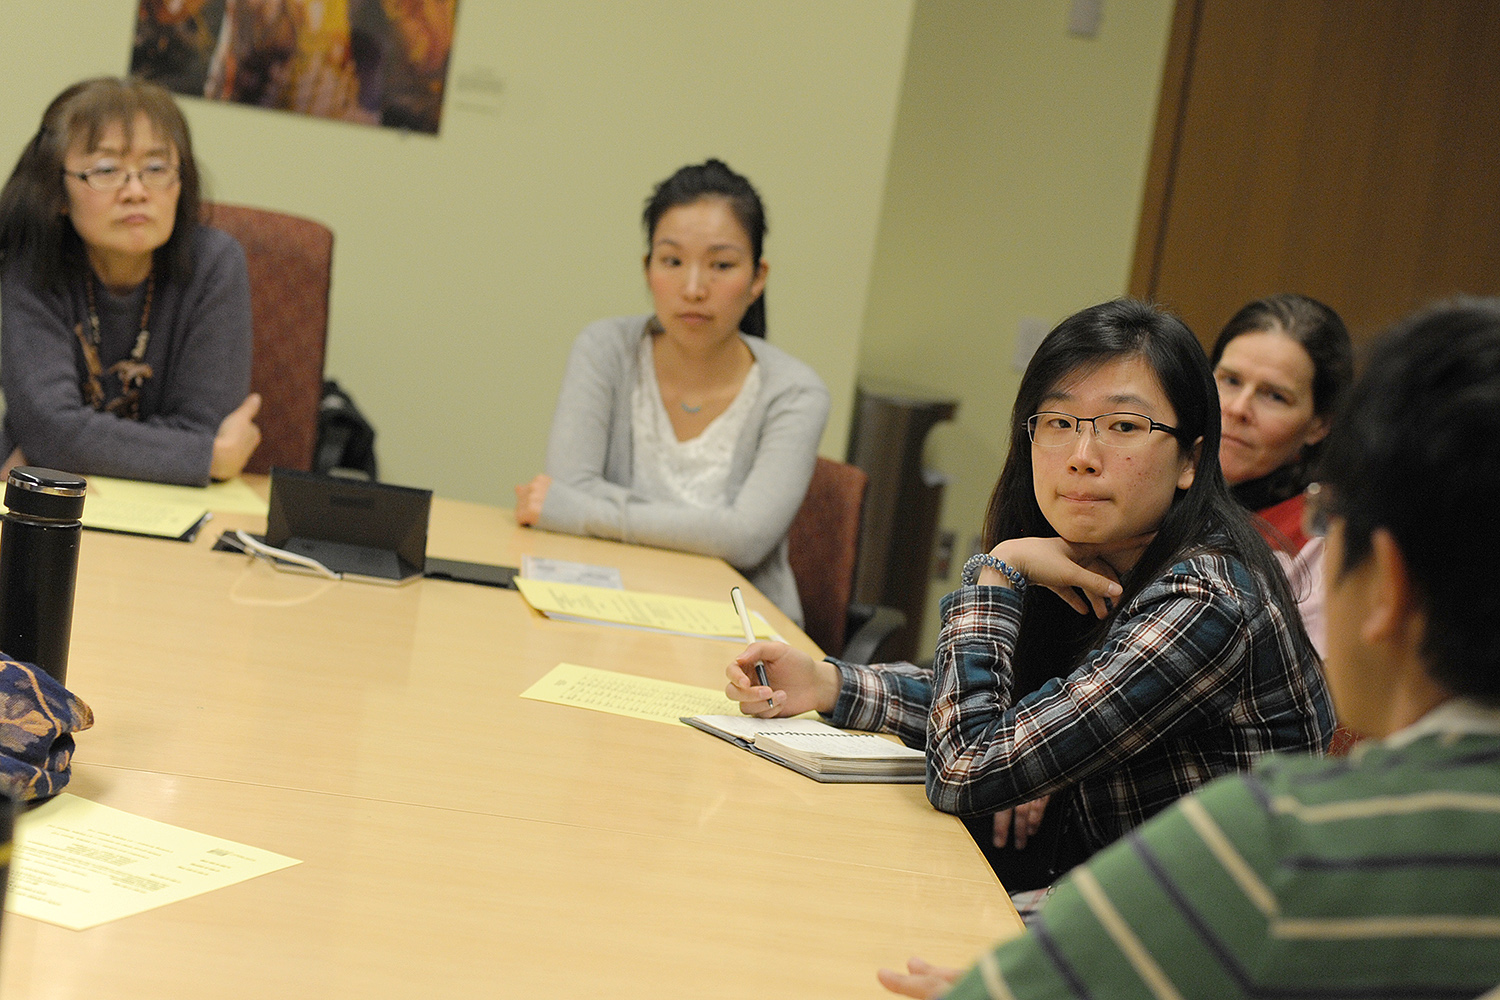 Following the faculty talks, students participated in group breakout sessions led by student facilitators.